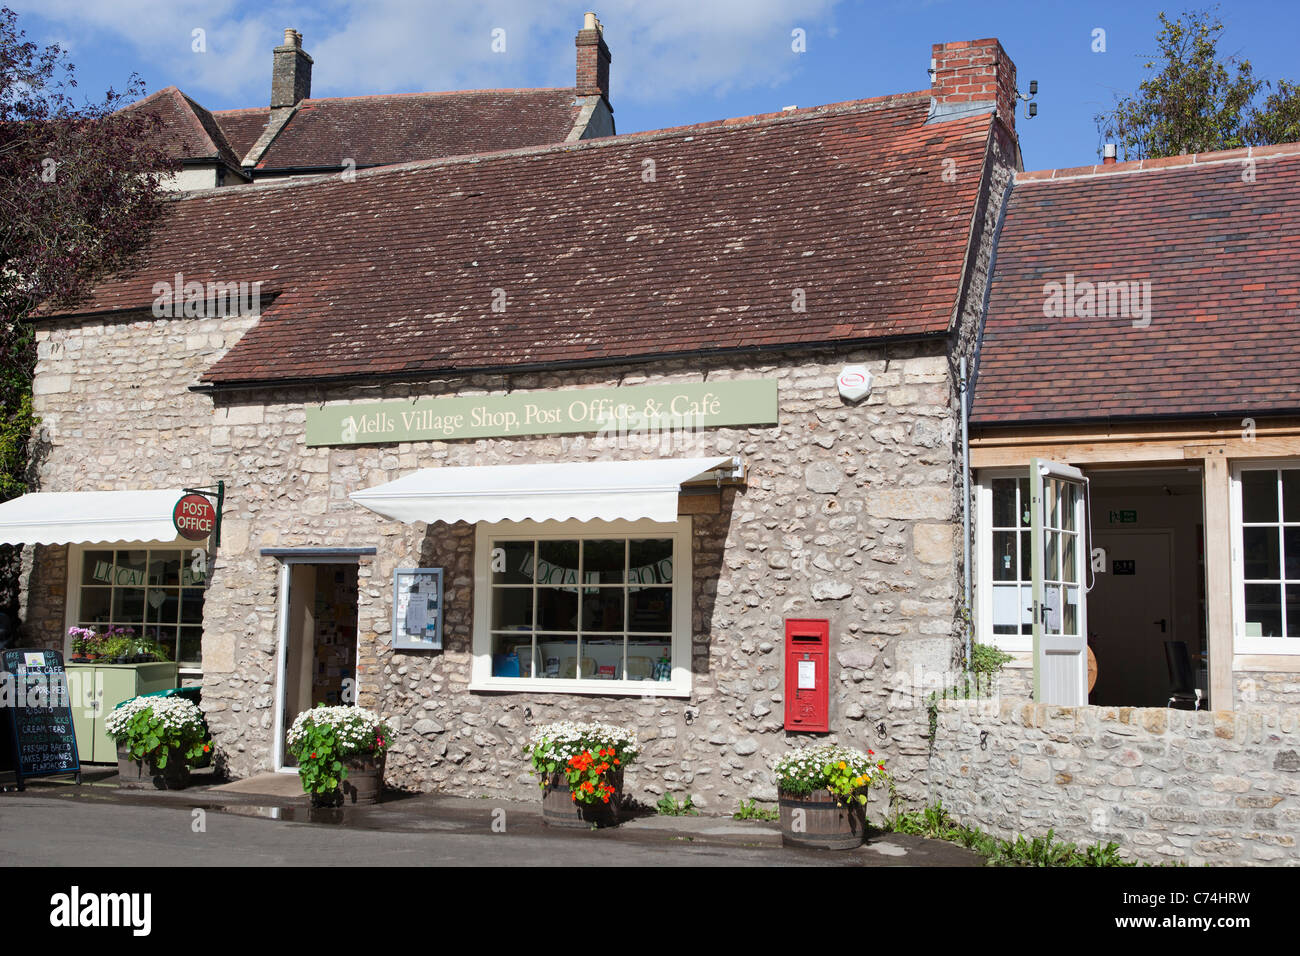 Mells Village Shop Post Office and Cafe Stock Photo